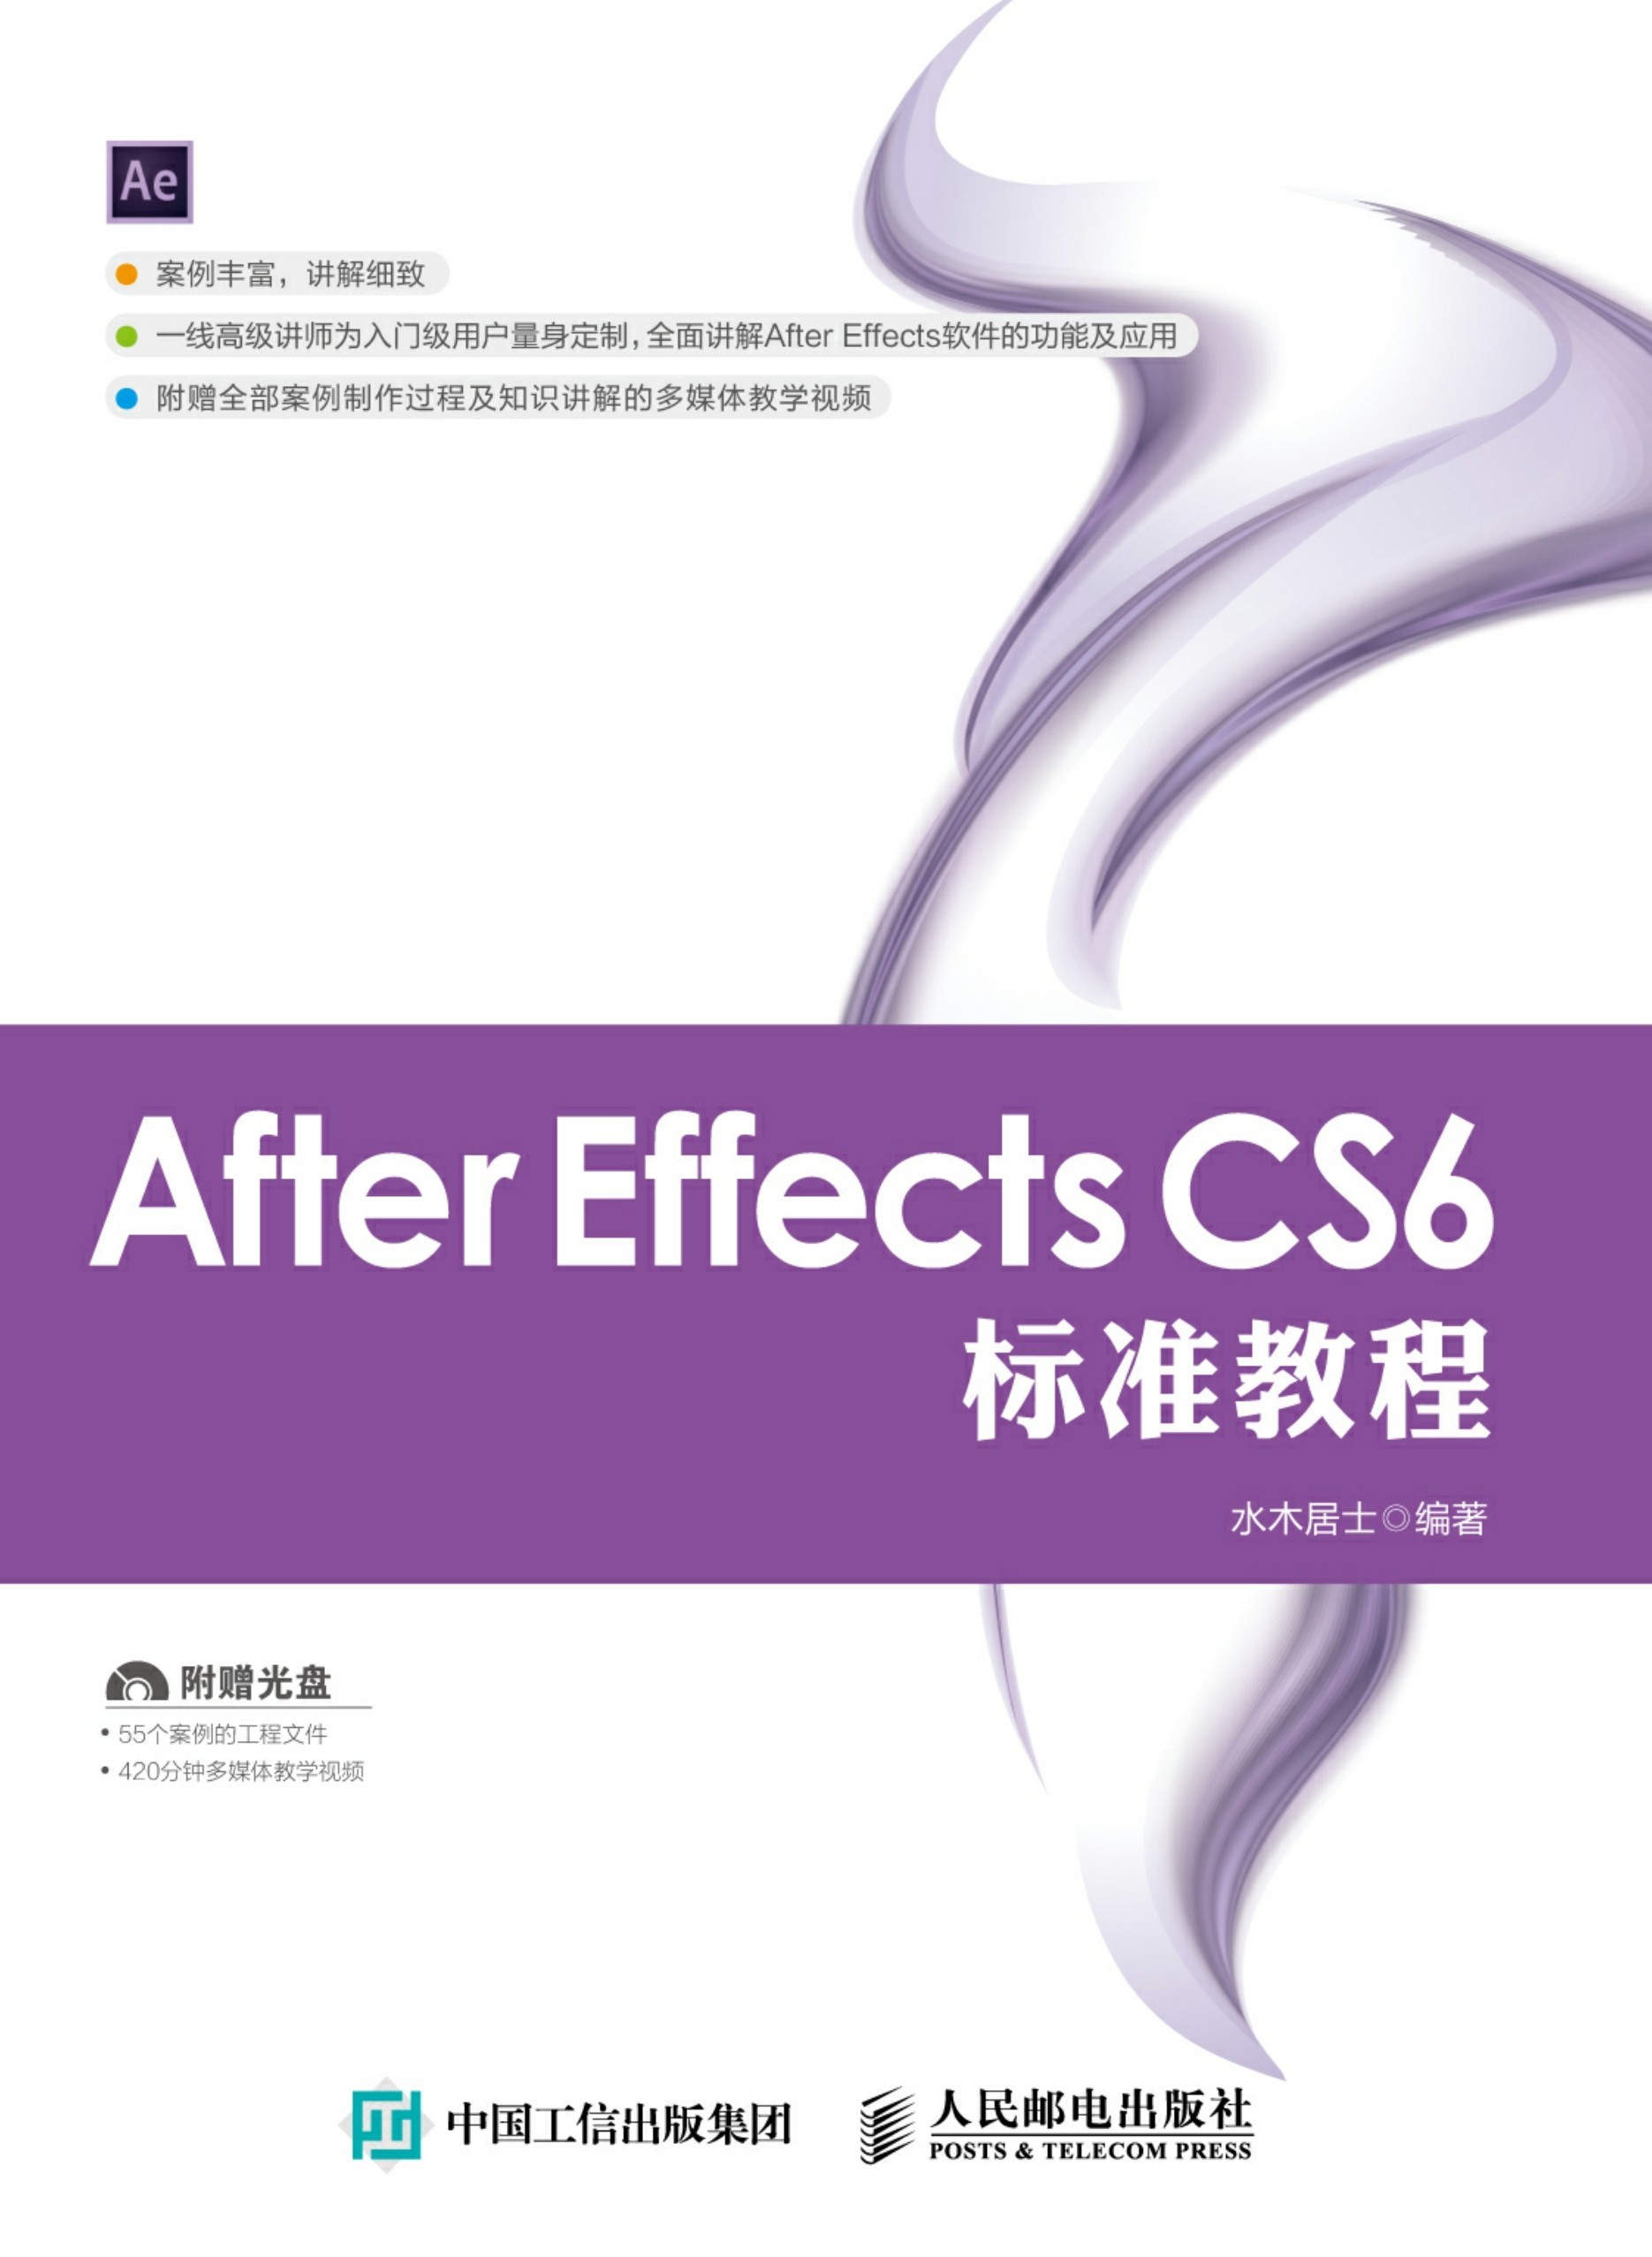 After Effects CS6 标准教程